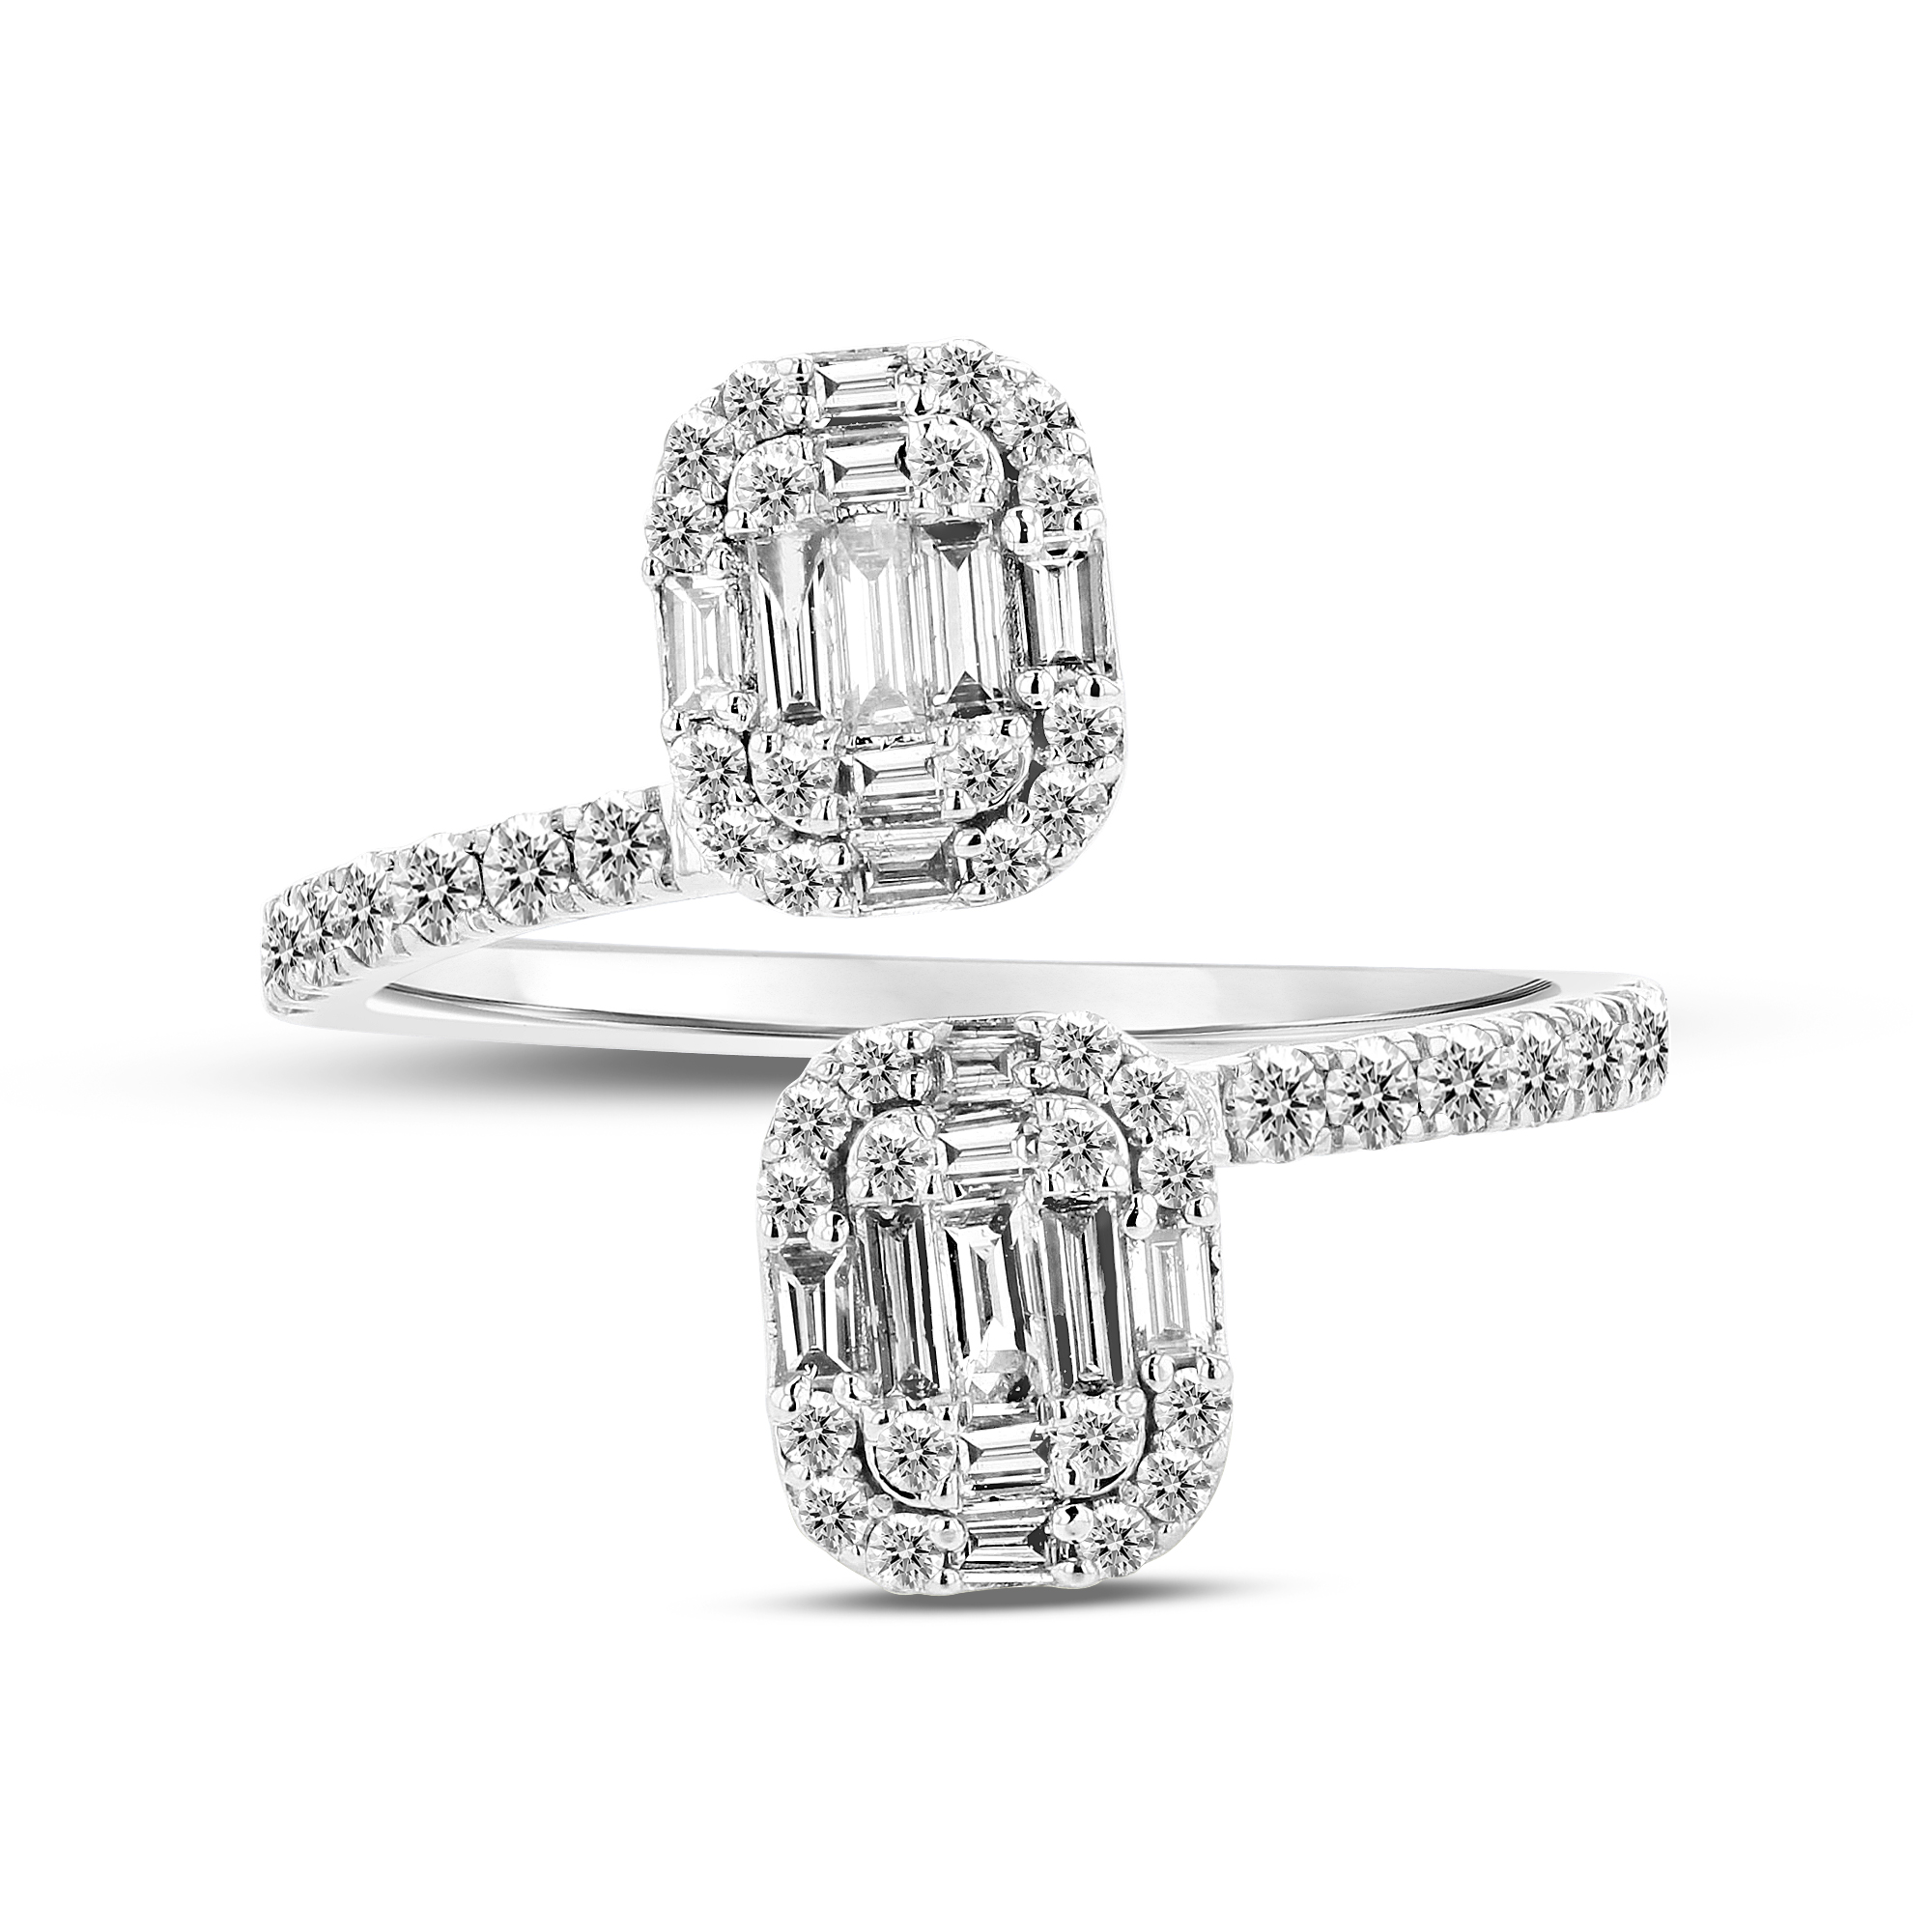 View 0.86ctw Diamond Bypass Ring in 14k White Gold